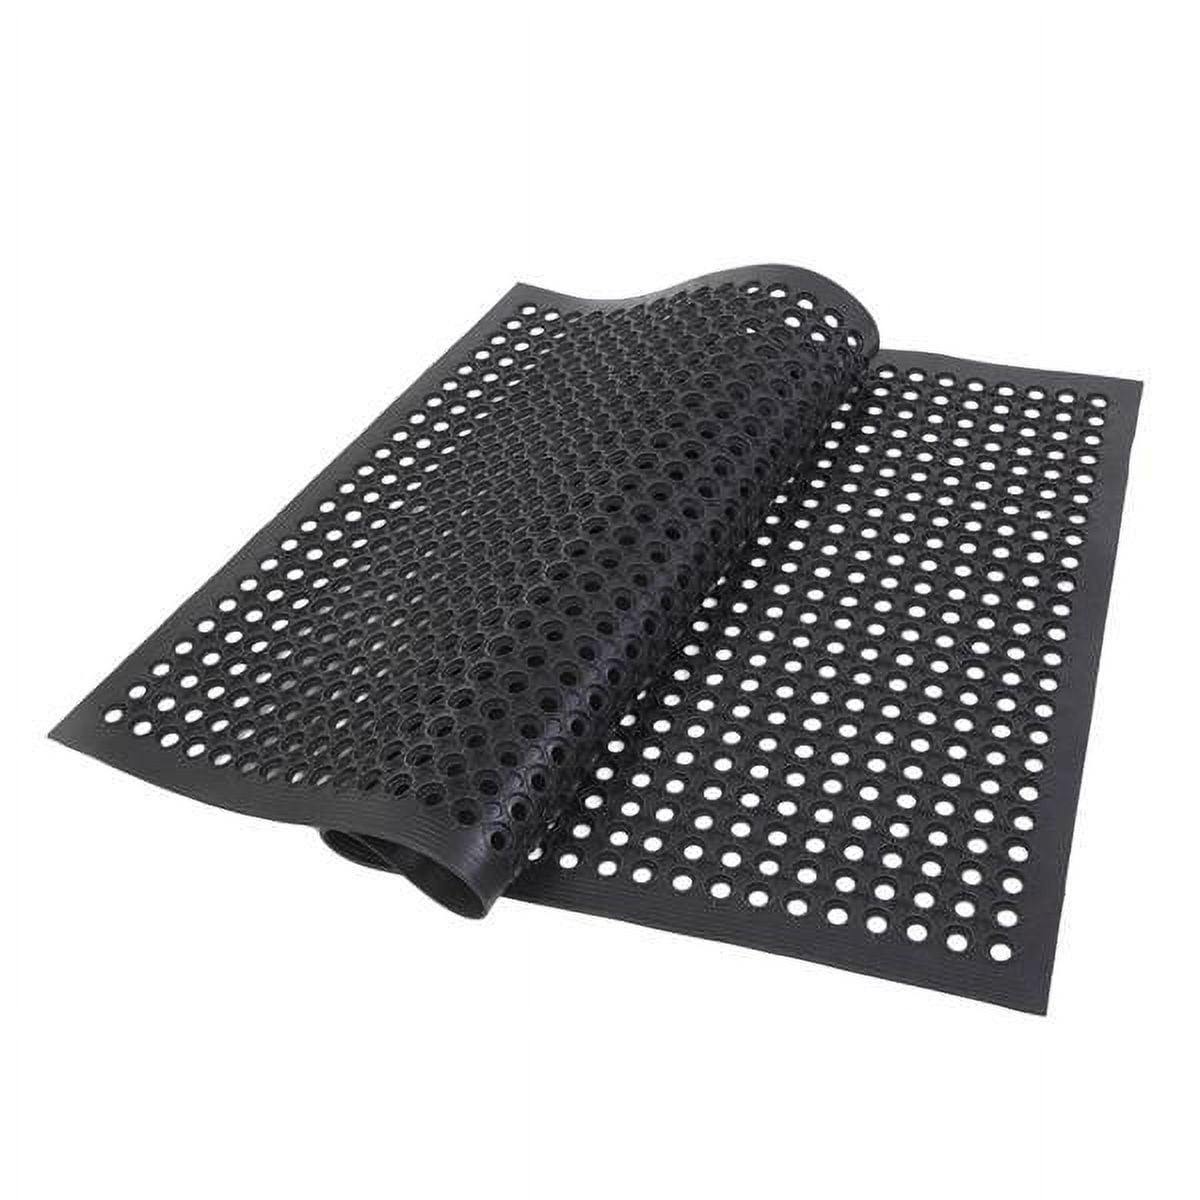 Free Flow Drainage Rubber Mats are Rubber Drainage Mats by